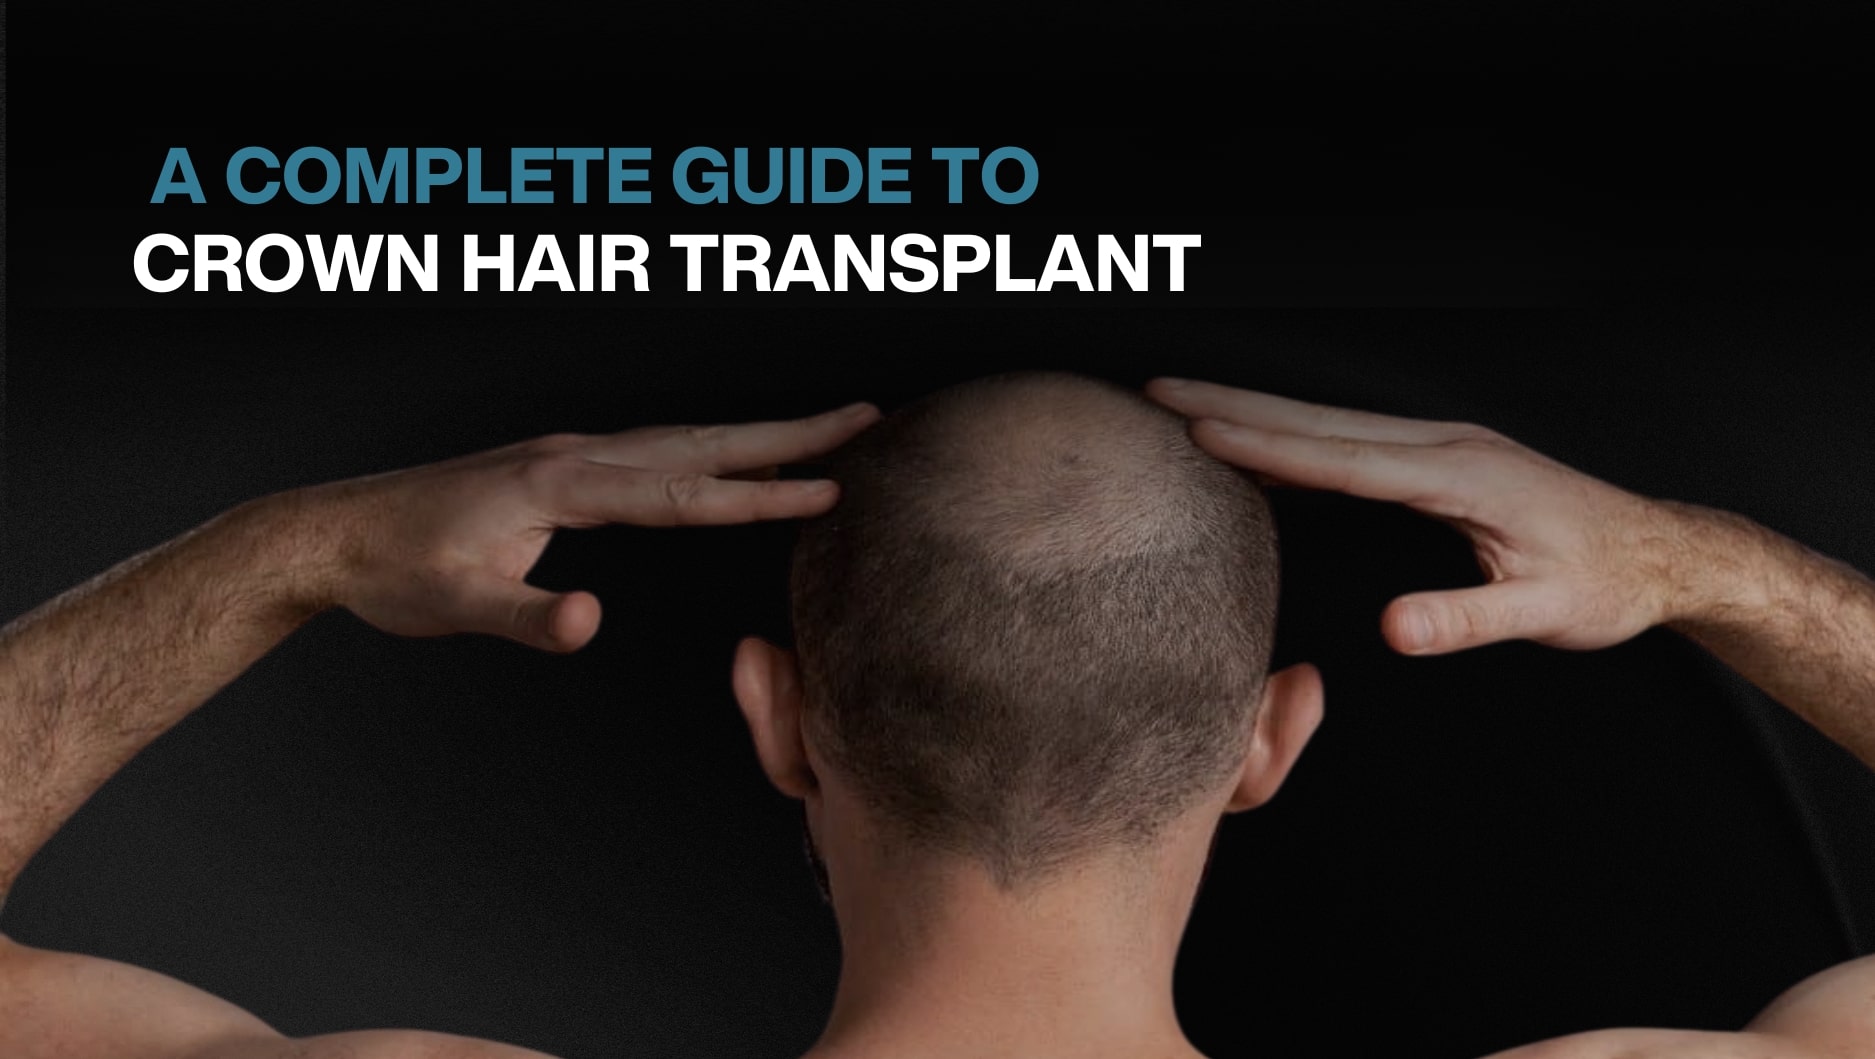 A Complete Guide To Crown Hair Transplant - BlueMagic Group